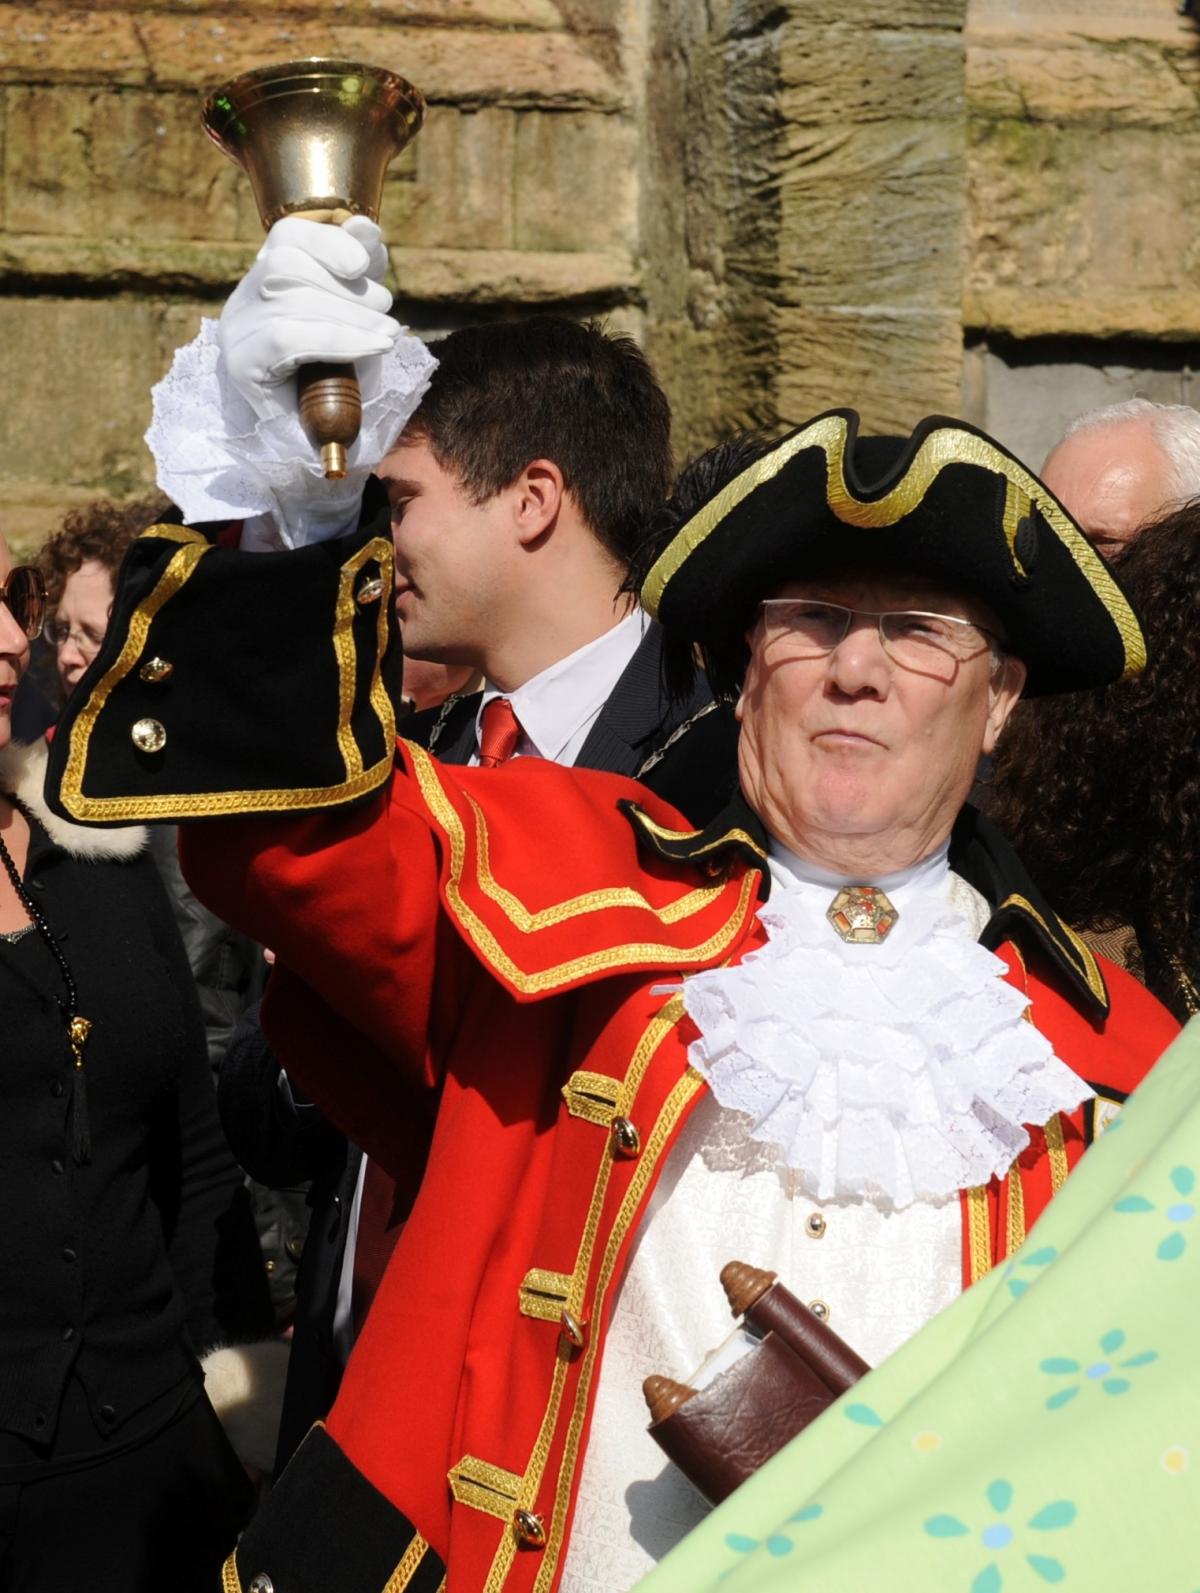 Nailsworth Town Crier Tony Evans announces the launch of the Hare Festival in Cirencester